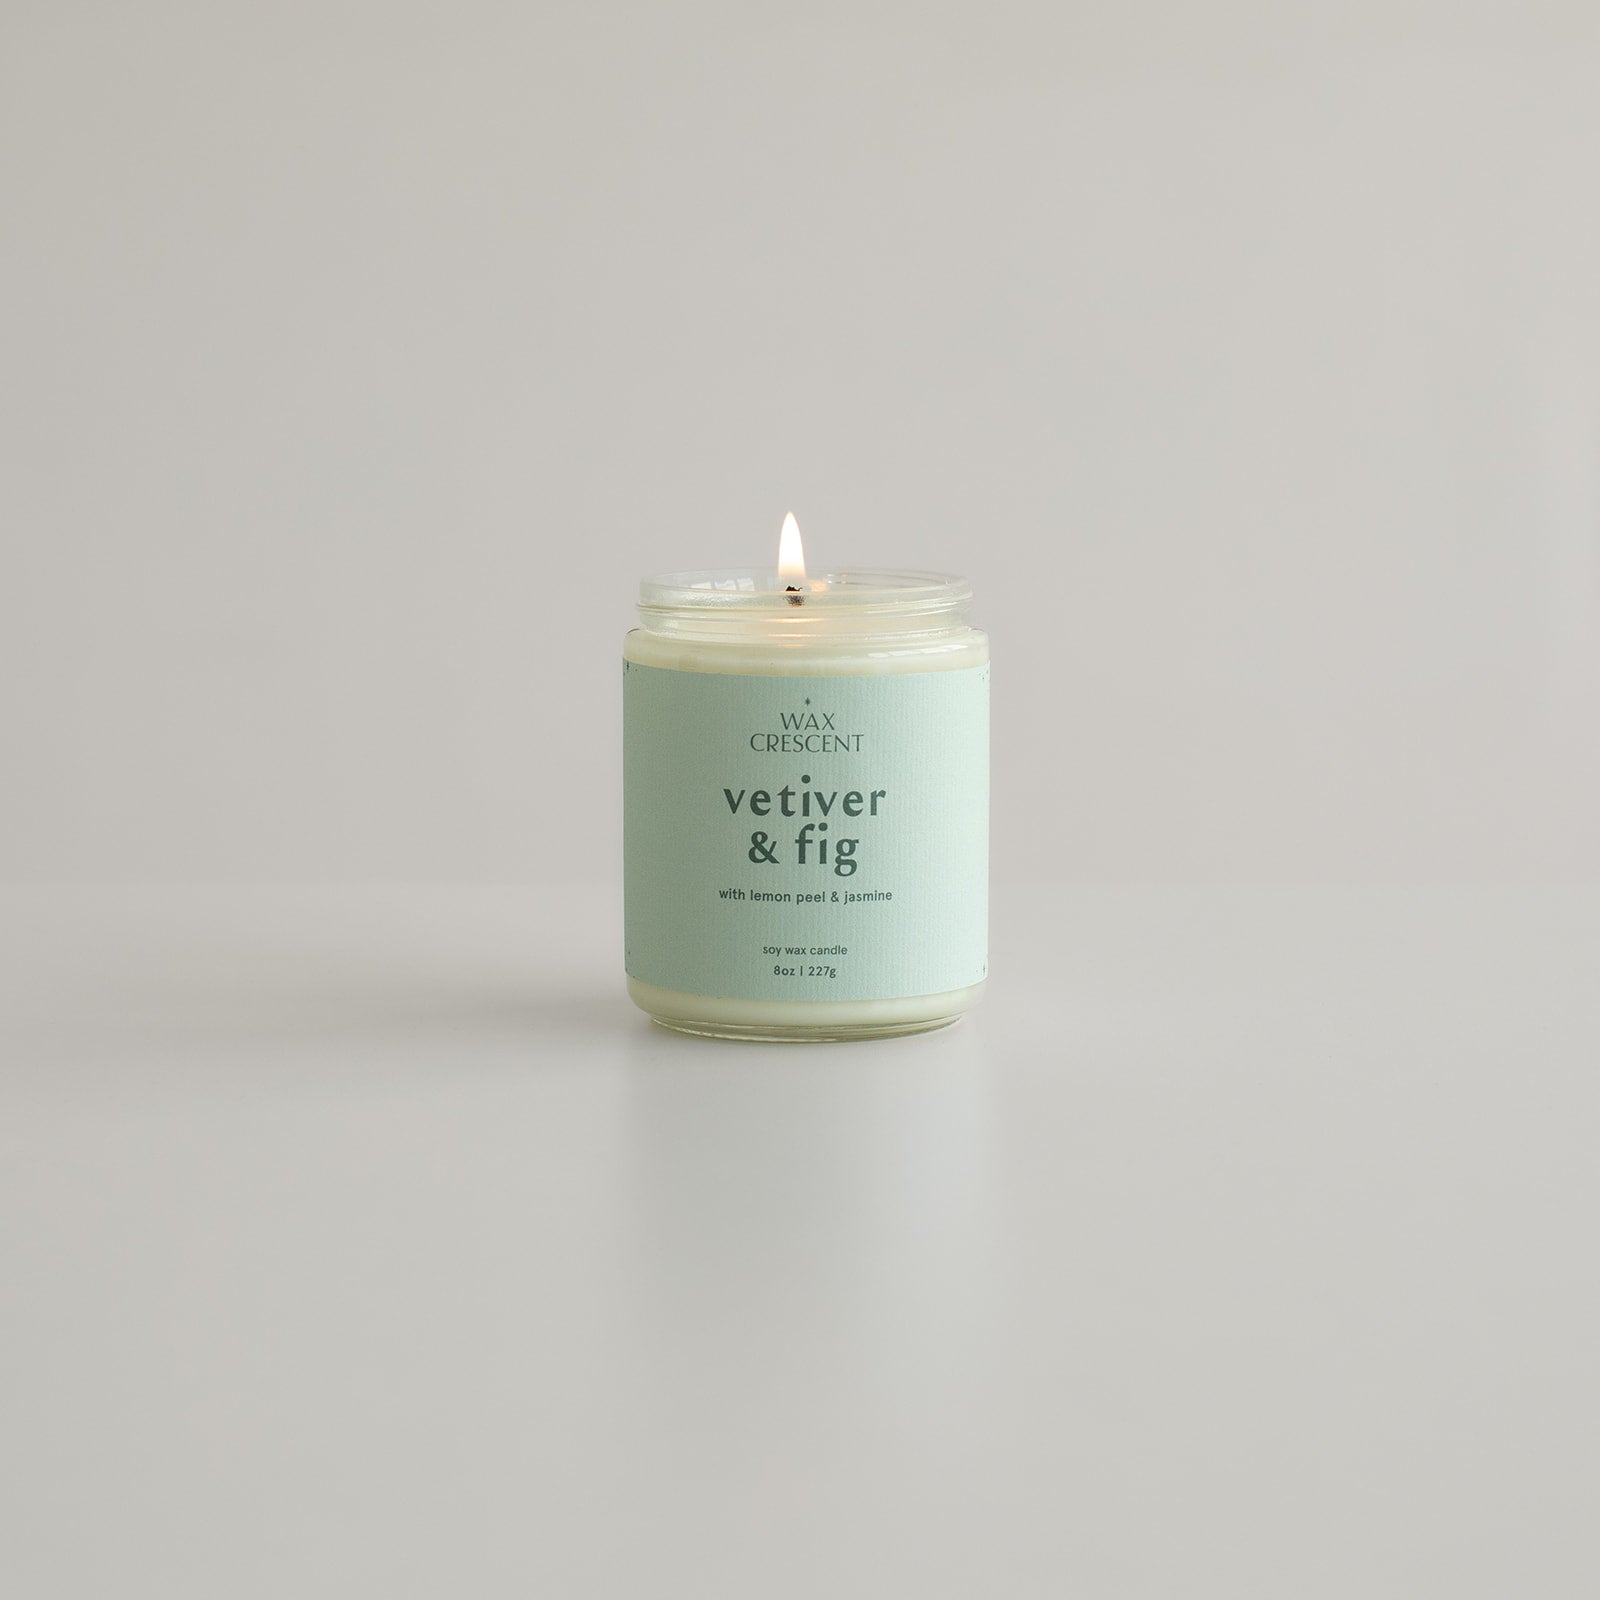 vetiver & fig soy wax candle is vegan and made in Boulder Colorado with nontoxic ingredients